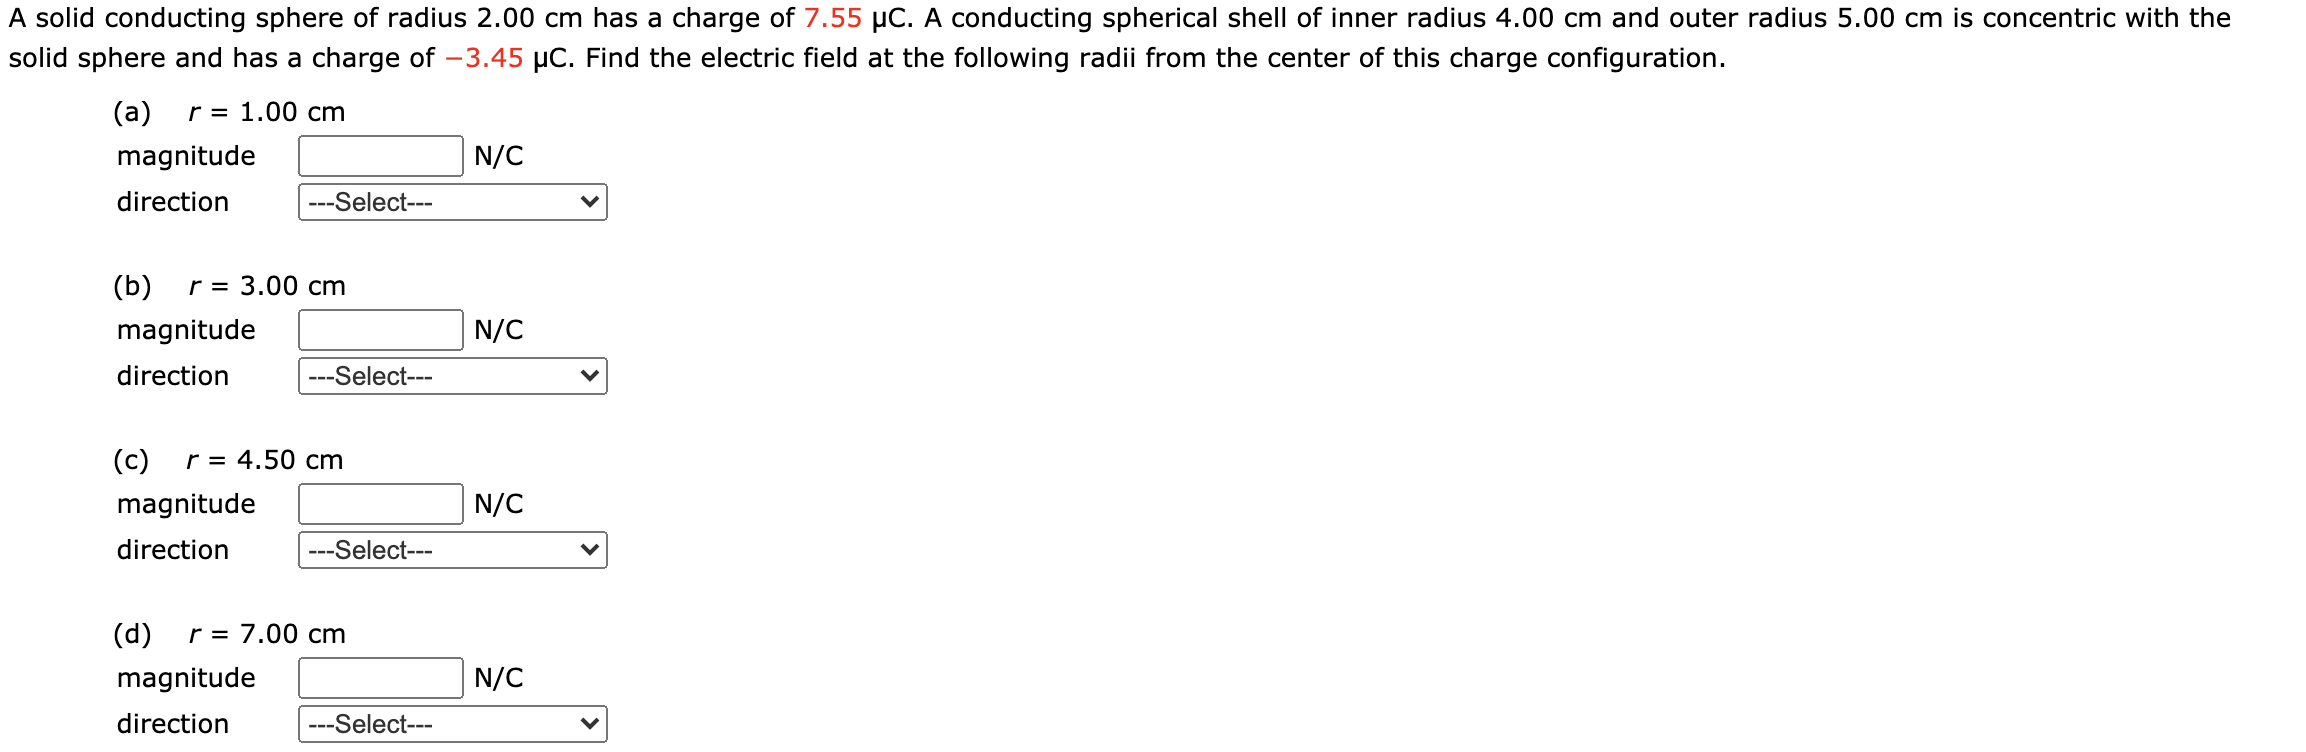 A solid conducting sphere of radius 2.00 cm has a charge of 7.55 µC. A conducting spherical shell of inner radius 4.00 cm and outer radius 5.00 cm is concentric with the
solid sphere and has a charge of -3.45 µC. Find the electric field at the following radii from the center of this charge configuration.
(a)
r = 1.00 cm
magnitude
N/C
direction
---Select---
(b)
r = 3.00 cm
magnitude
N/C
direction
---Select---
(c)
r = 4.50 cm
magnitude
N/C
direction
---Select---
(d)
r = 7.00 cm
magnitude
N/C
direction
---Select---
